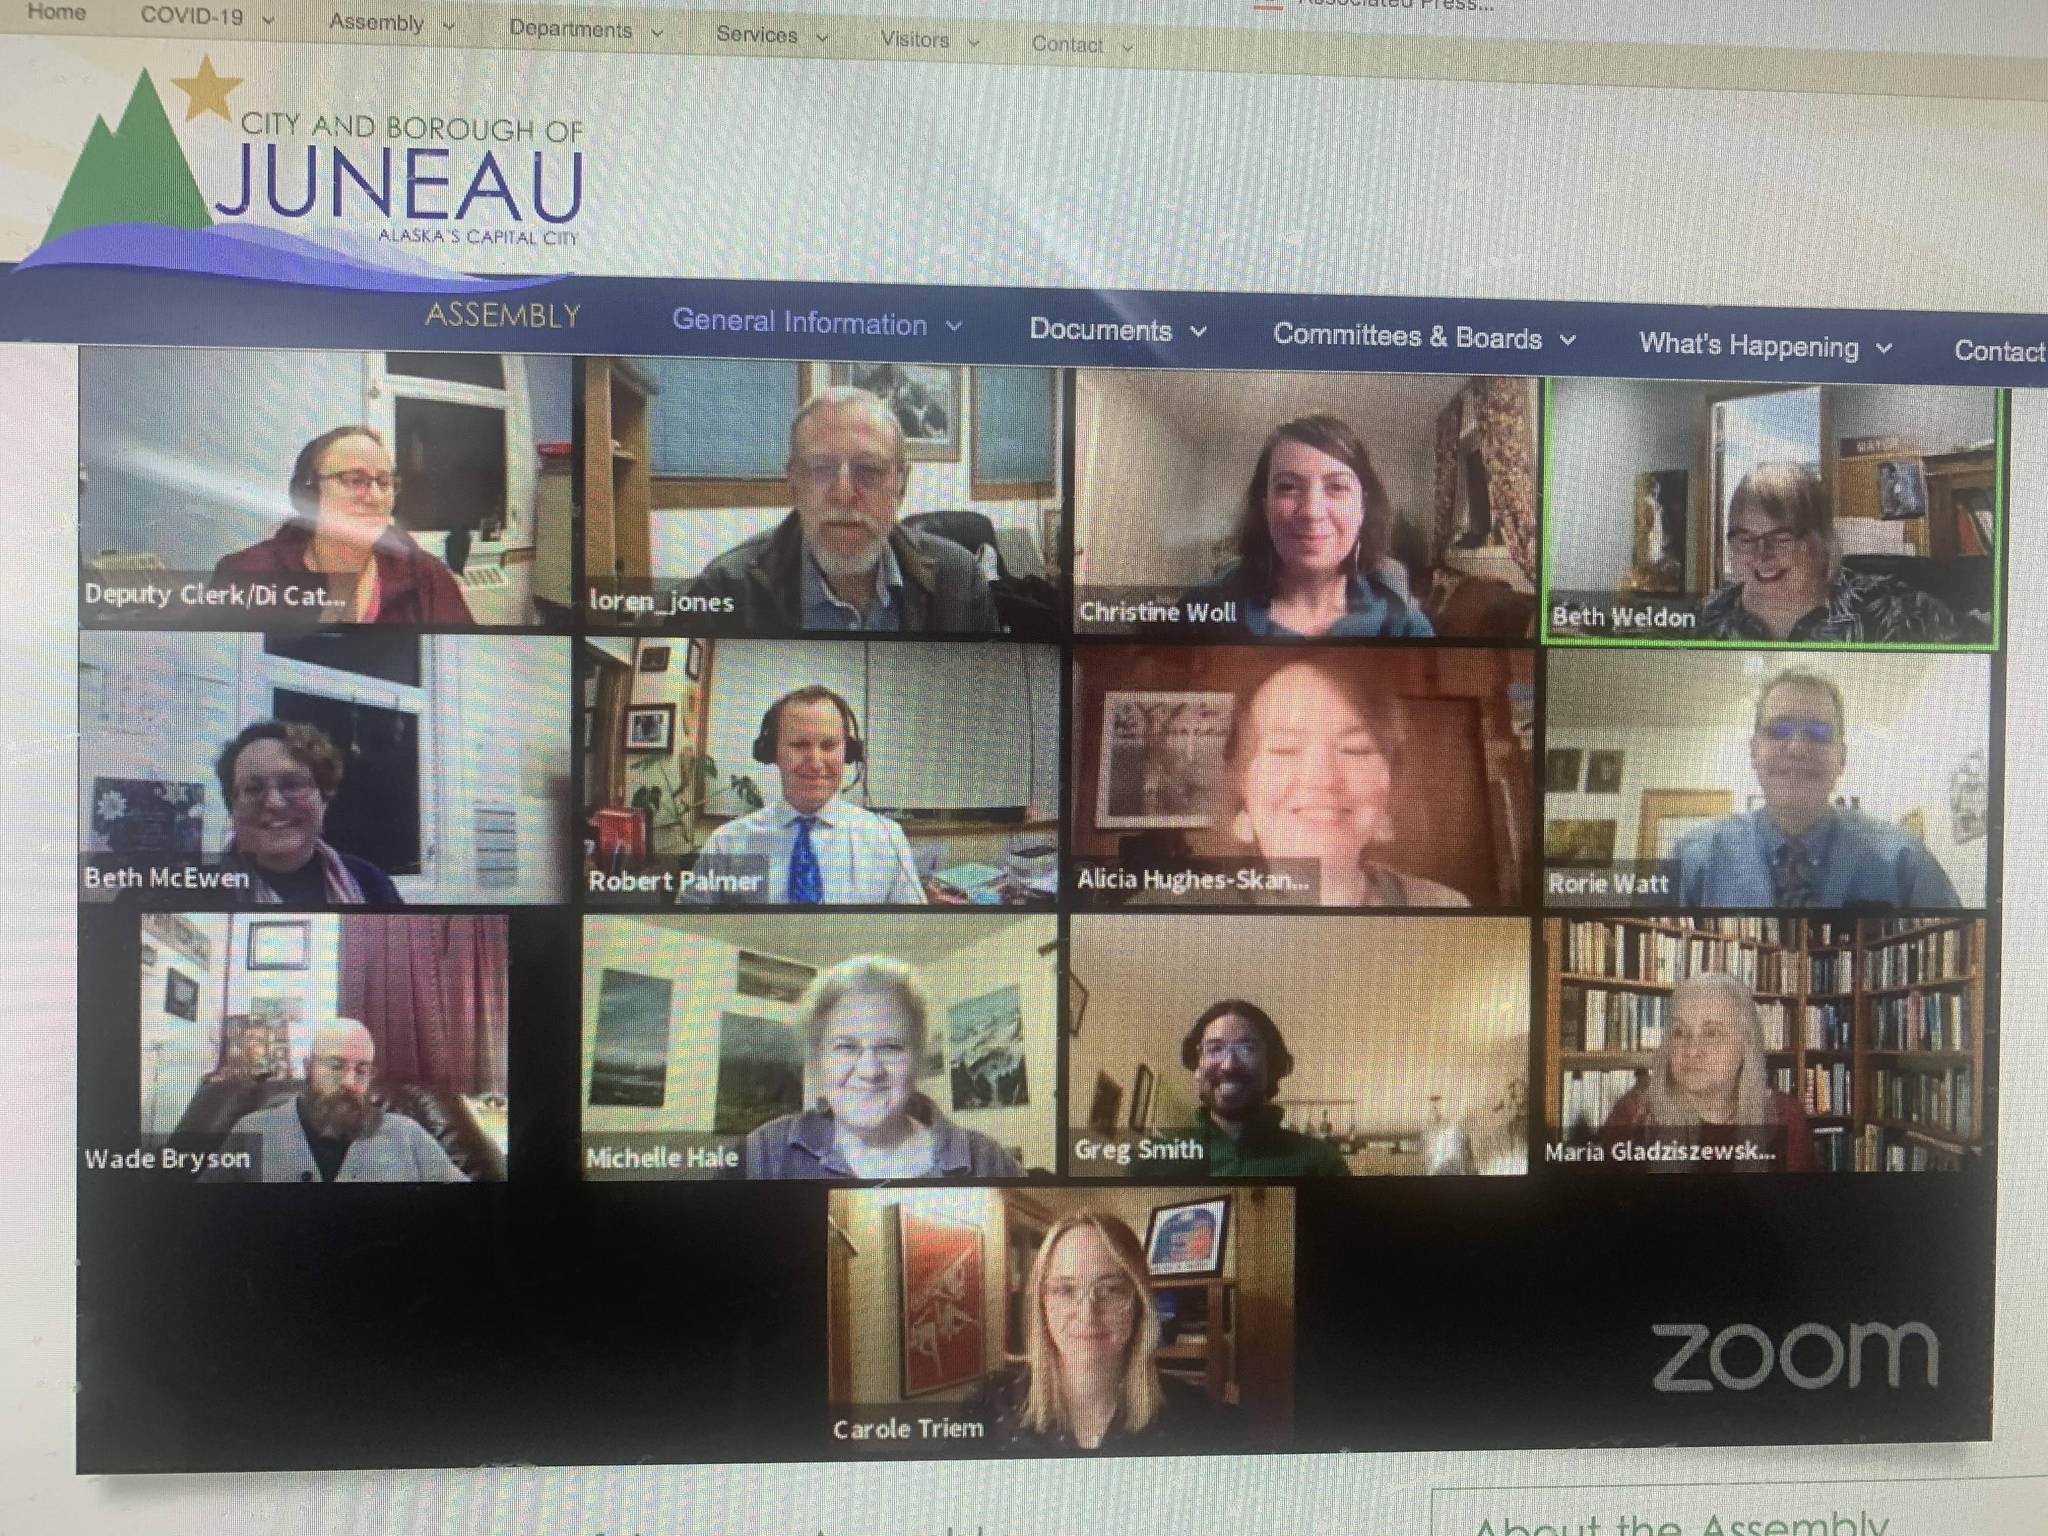 Like many municipal bodies, the City and Borough of Juneau has been conducting business via public meetings hosted on Zoom. While this has helped to keep the wheels of government turning, it's also opened the door to Zoom bombing. Zoom bombing happens when an anonymous party joins the meeting and shares graphic or lewd content. City officials are considering an ordinance that makes it illegal to Zoom bomb a meeting hosted from Juneau. This screen grab from CBJ's website shows the city assembly meeting via Zoom. (Screenshot)